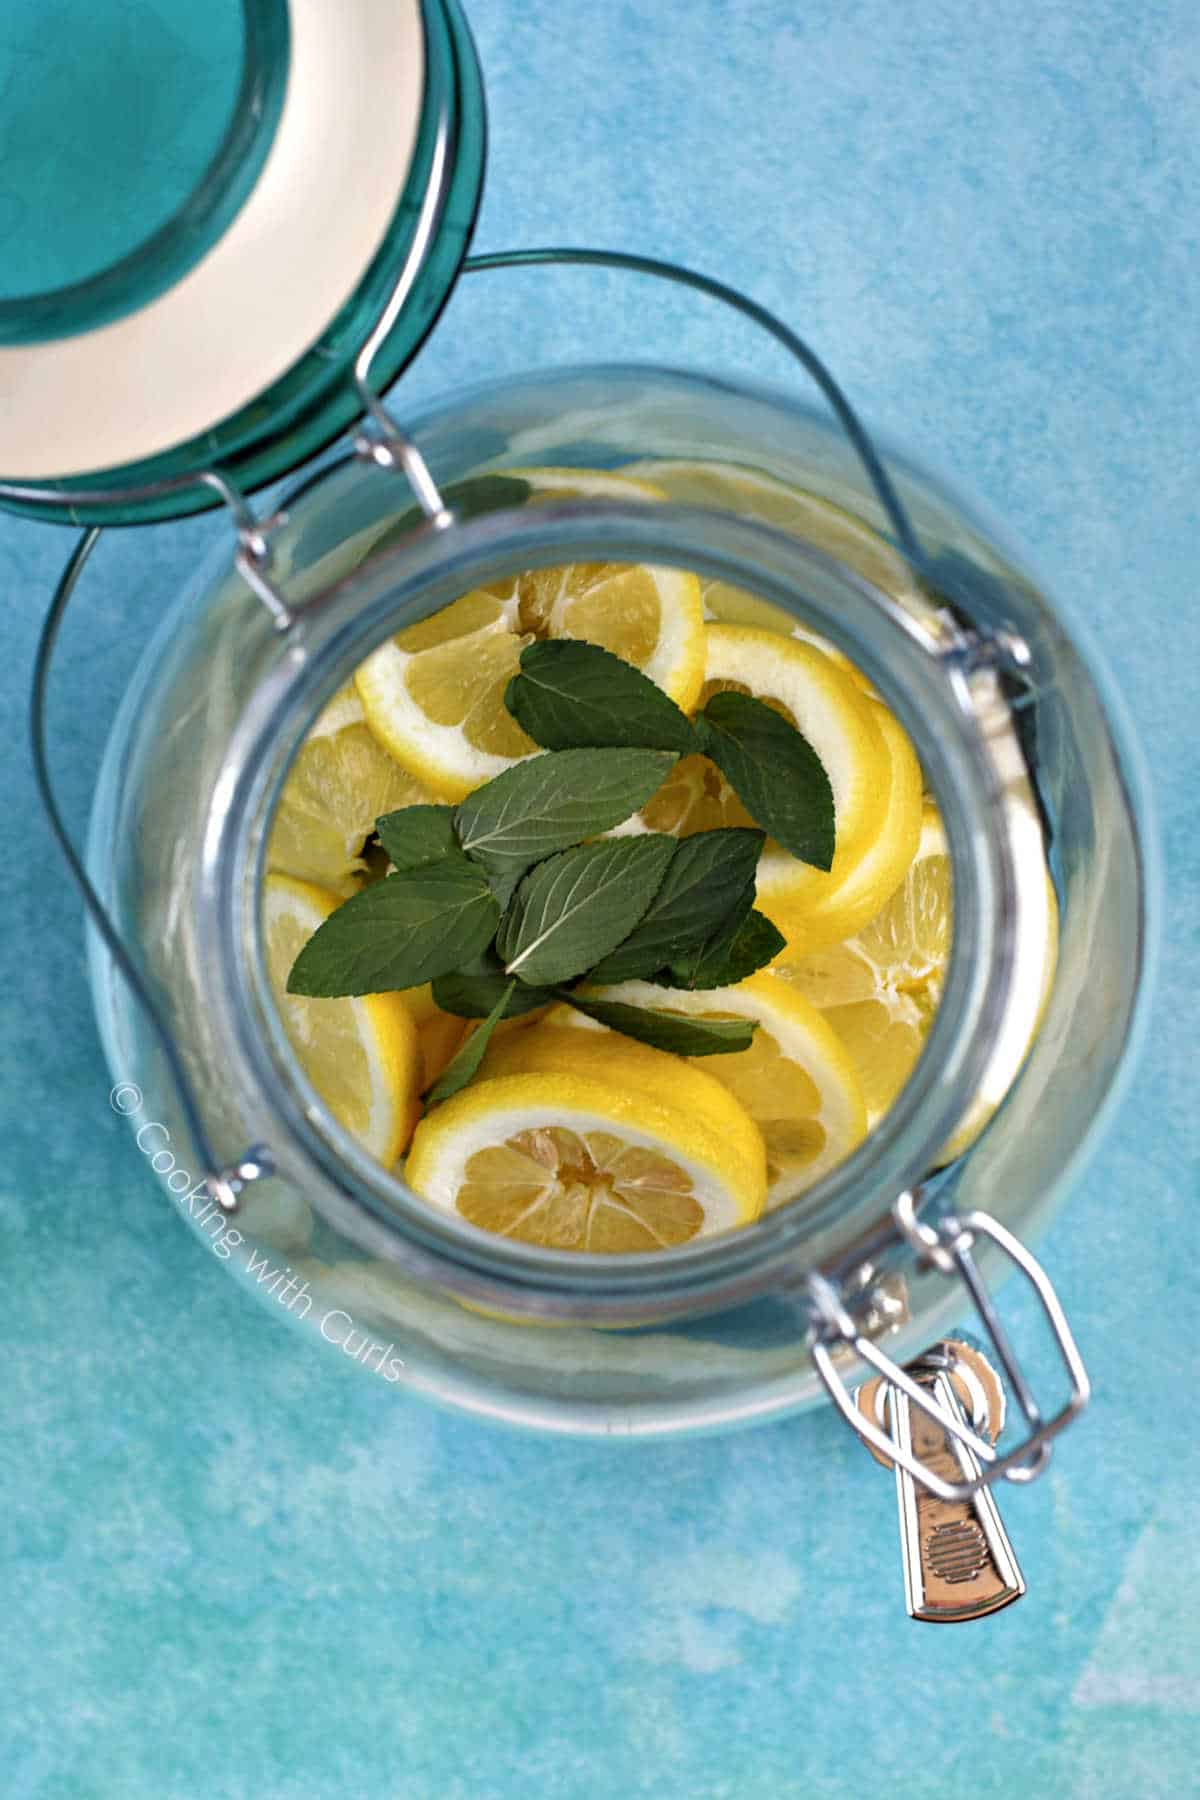 Looking down into a large container with slices of cucumber, lemon and mint leaves.